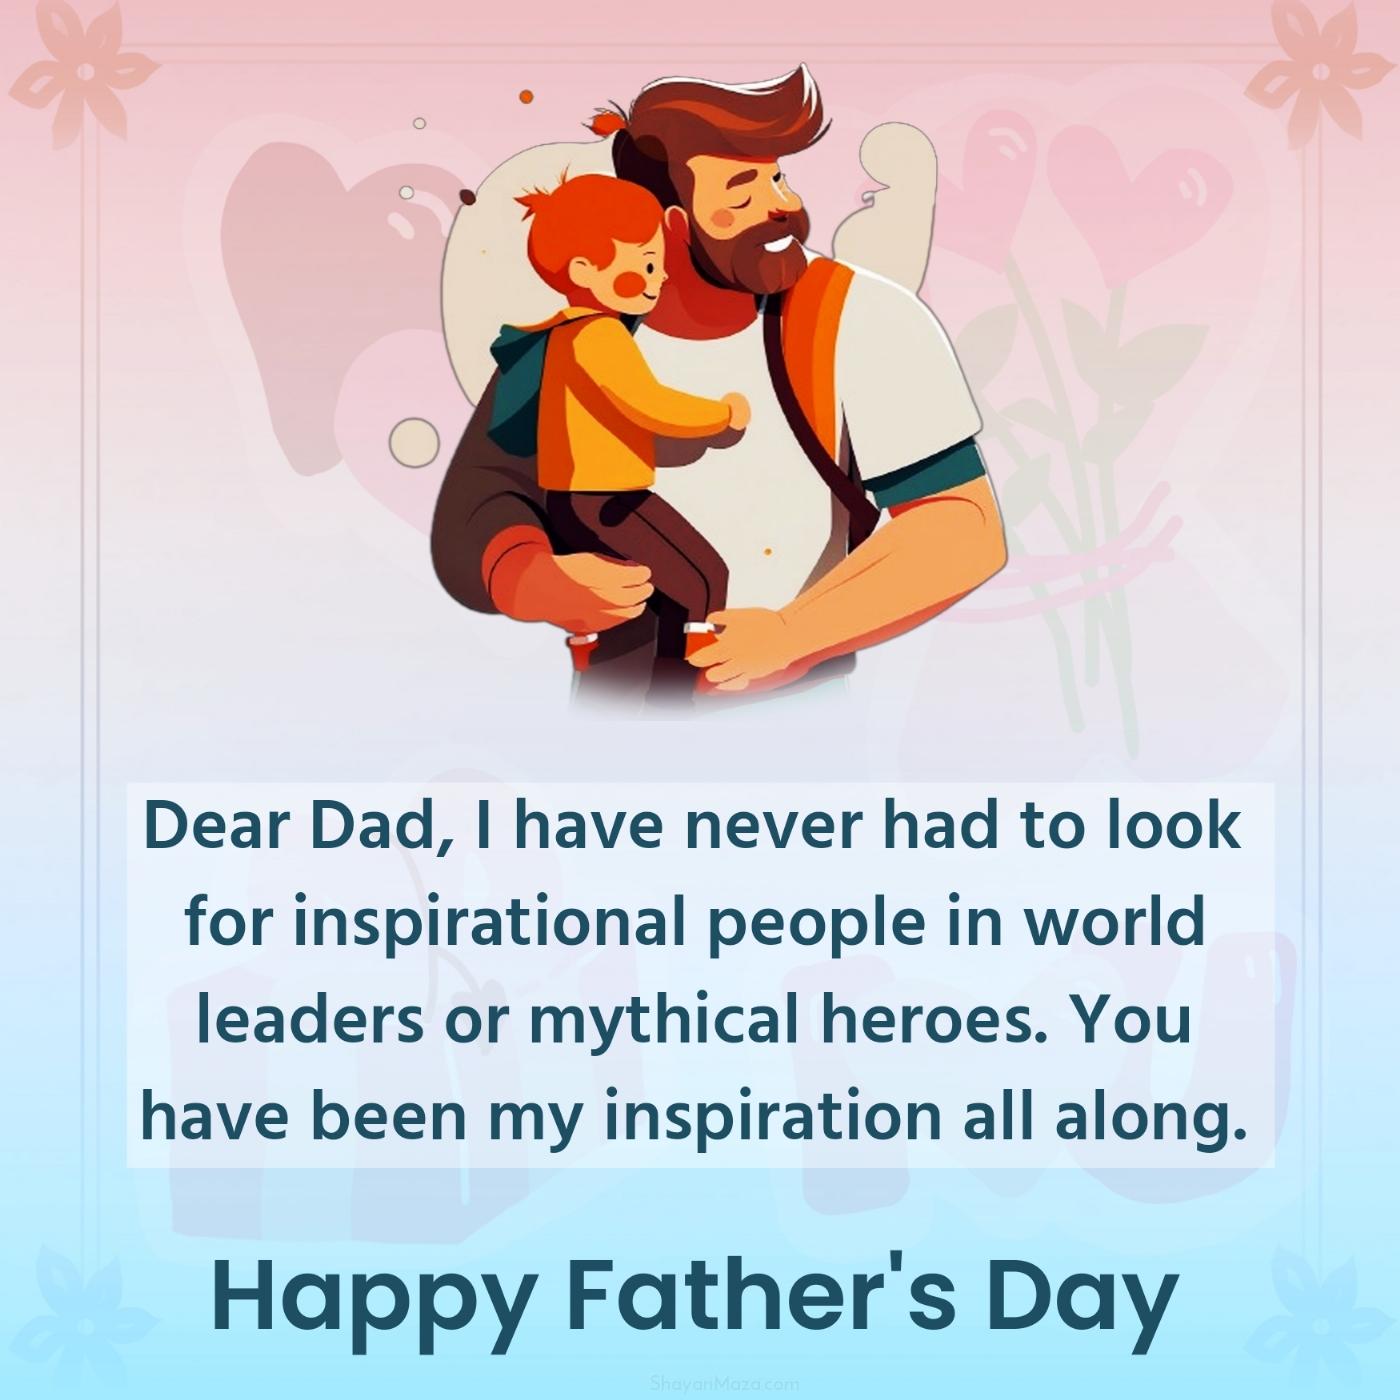 Dear Dad I have never had to look for inspirational people